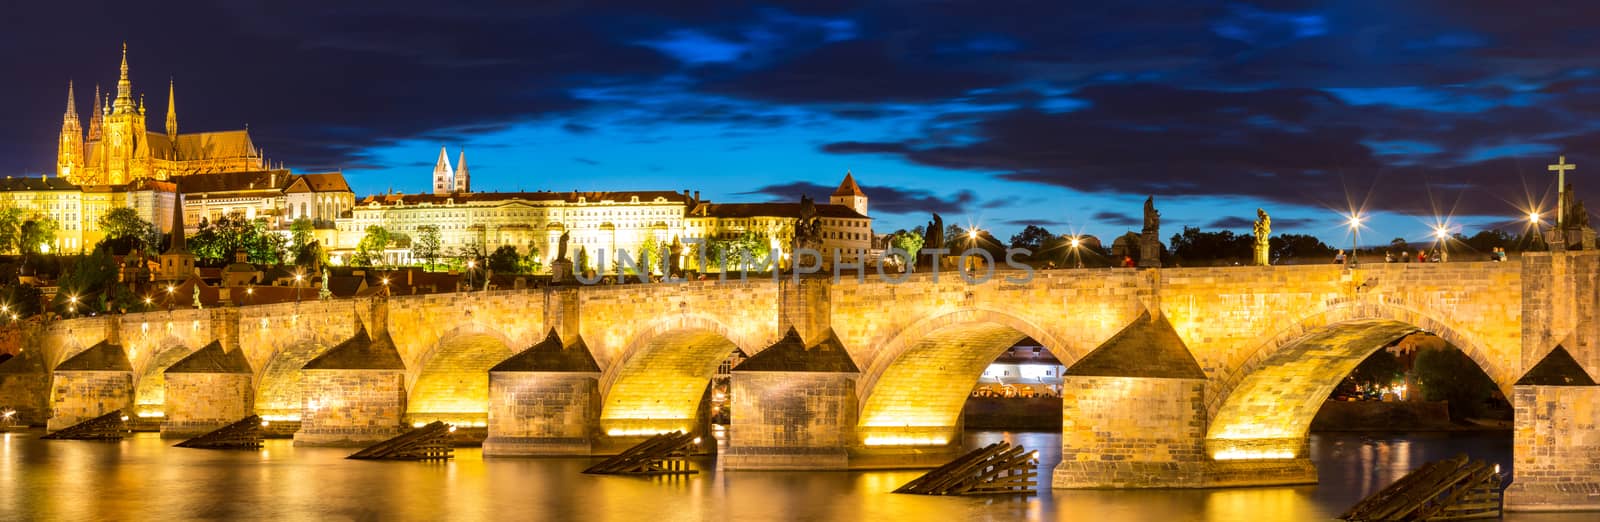 Pargue sunset, view of the Lesser Bridge Tower of Charles Bridge (Karluv Most) and Prague Castle, Czech Republic.